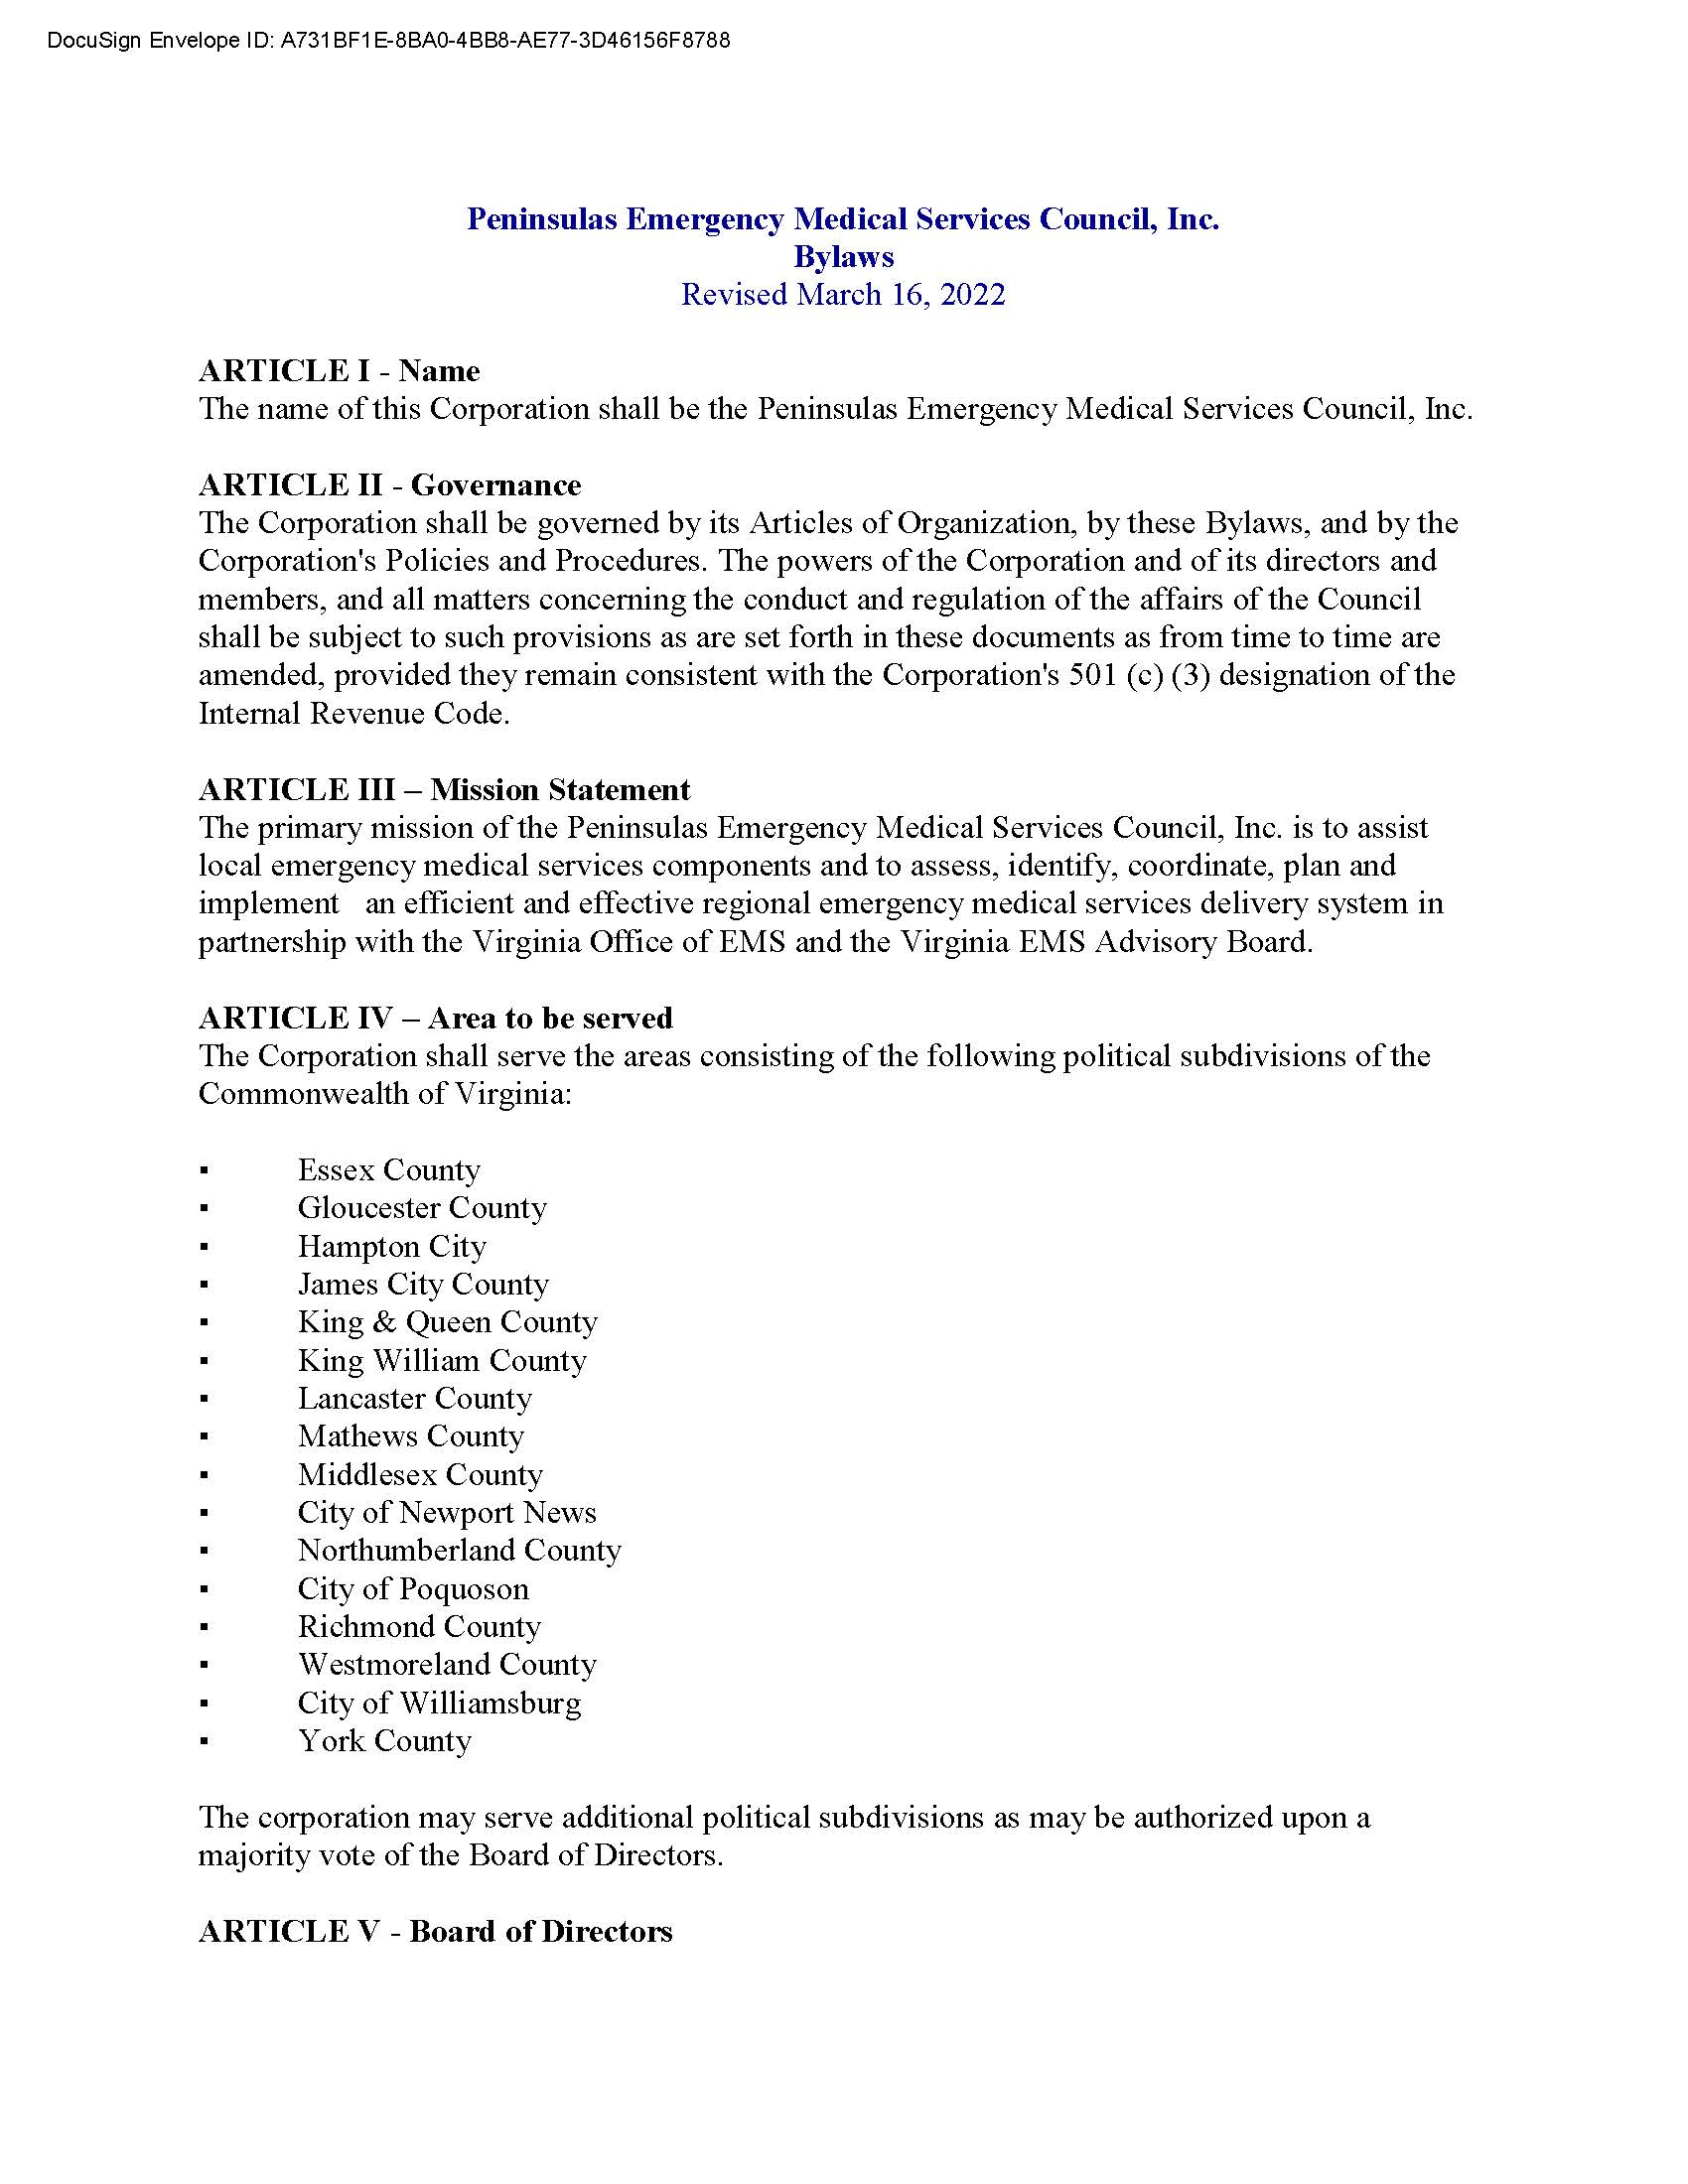 PEMS Council Inc. Bylaws 3 16 2022 Page 01